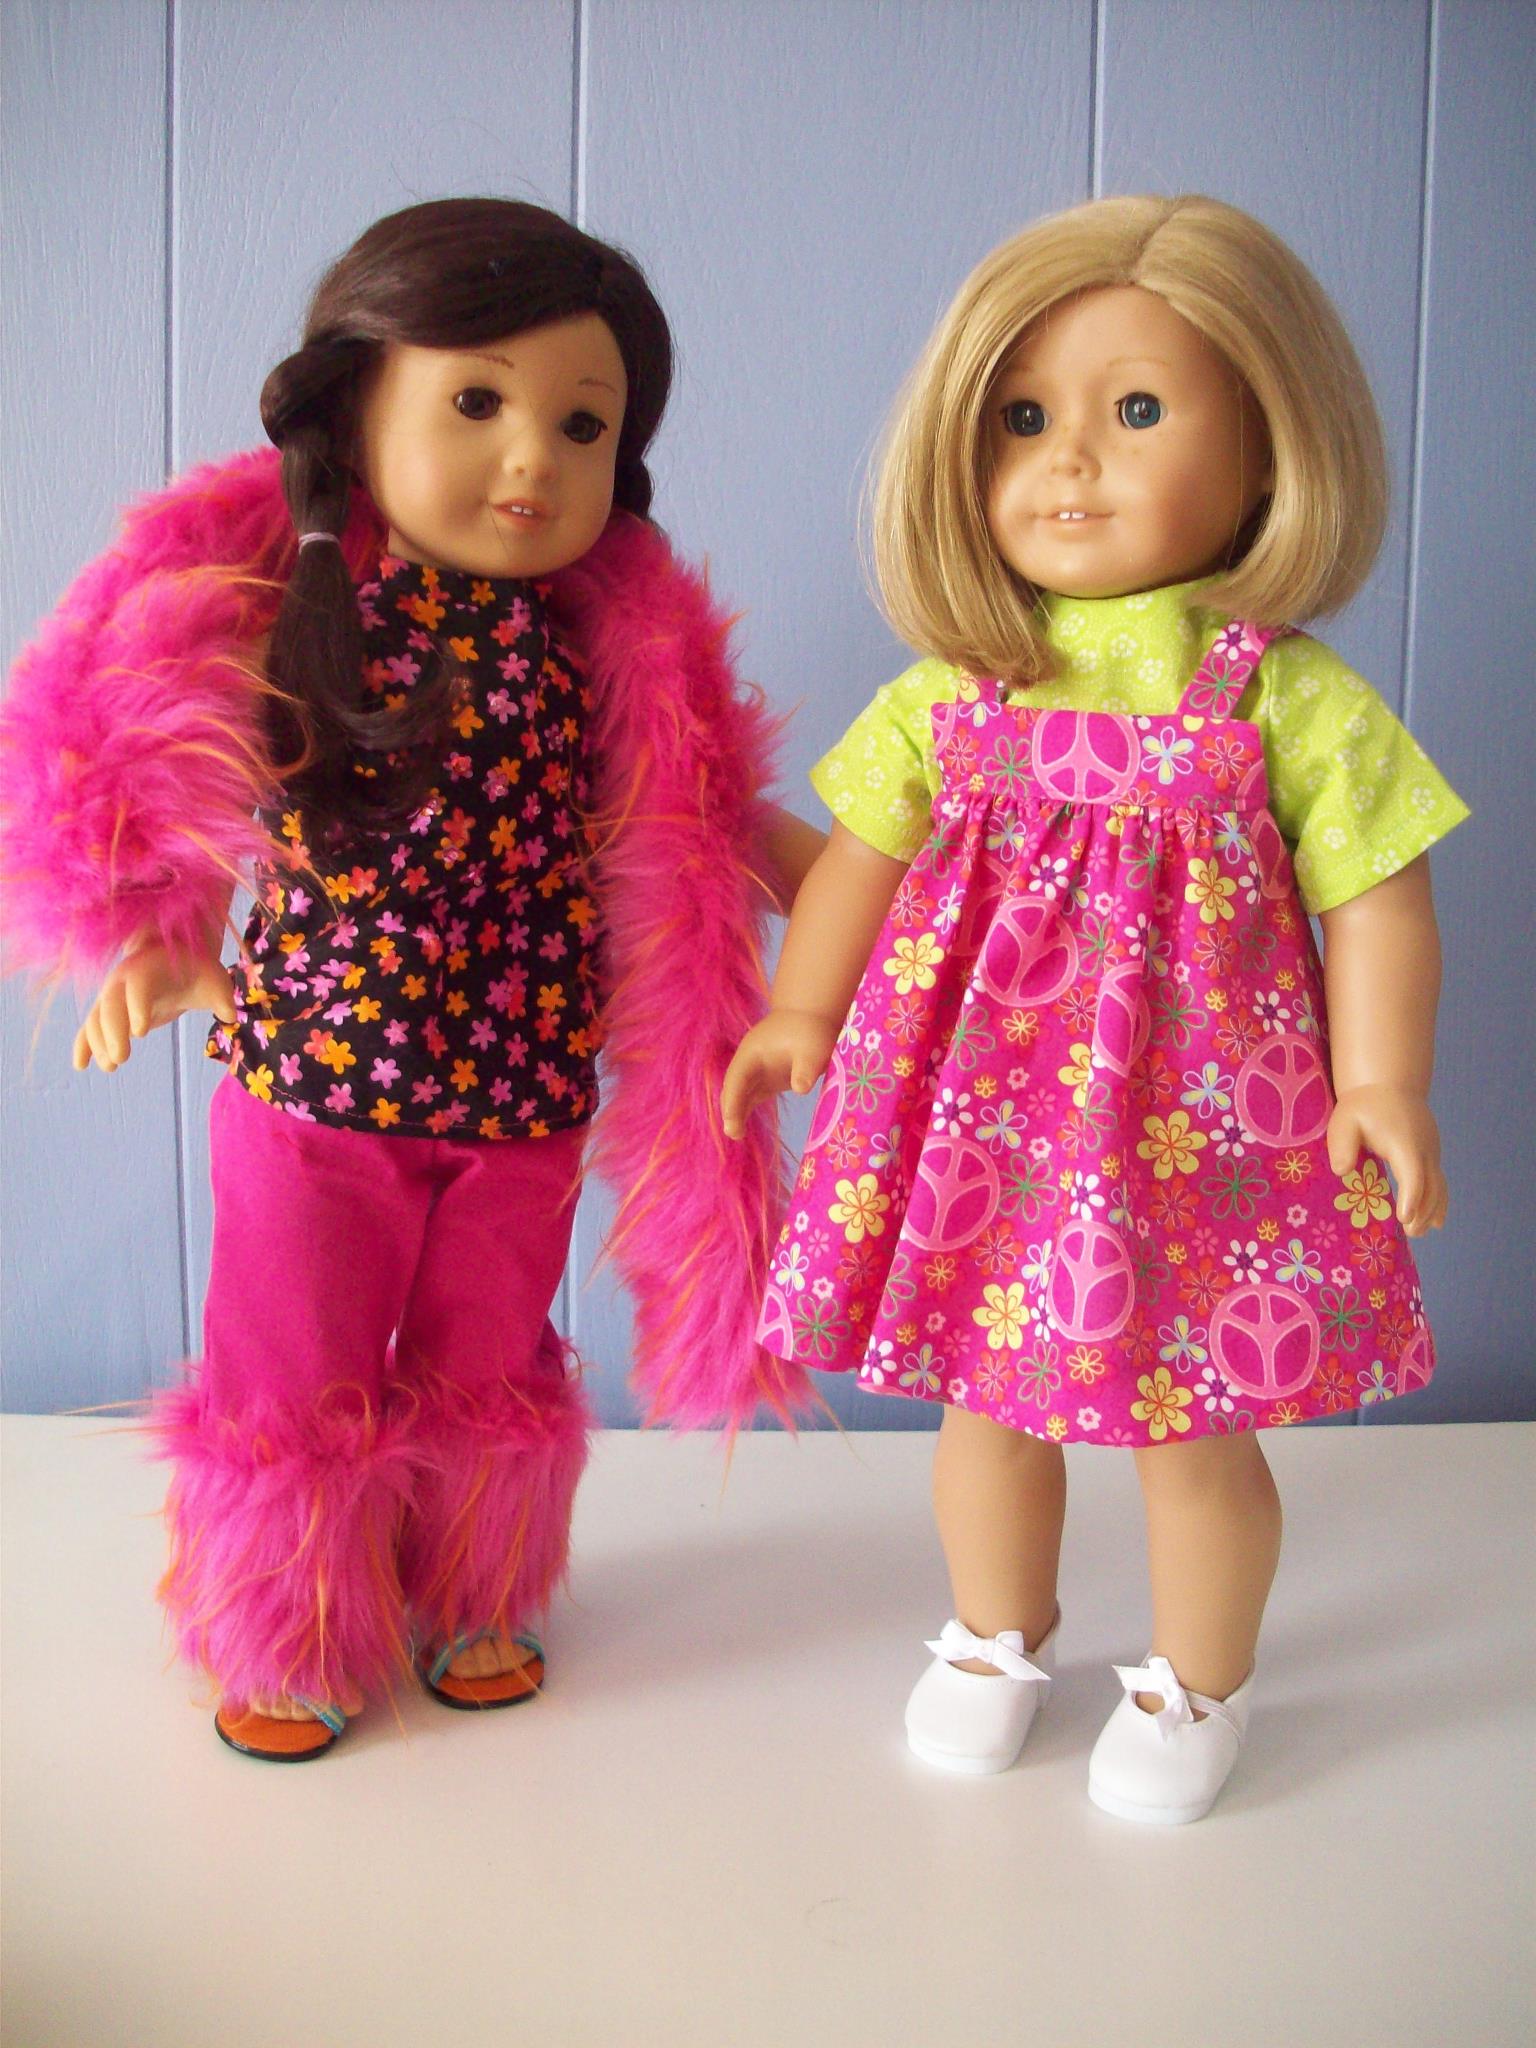 house-of-busifingers-outfits-dolls-carterville-illinois.